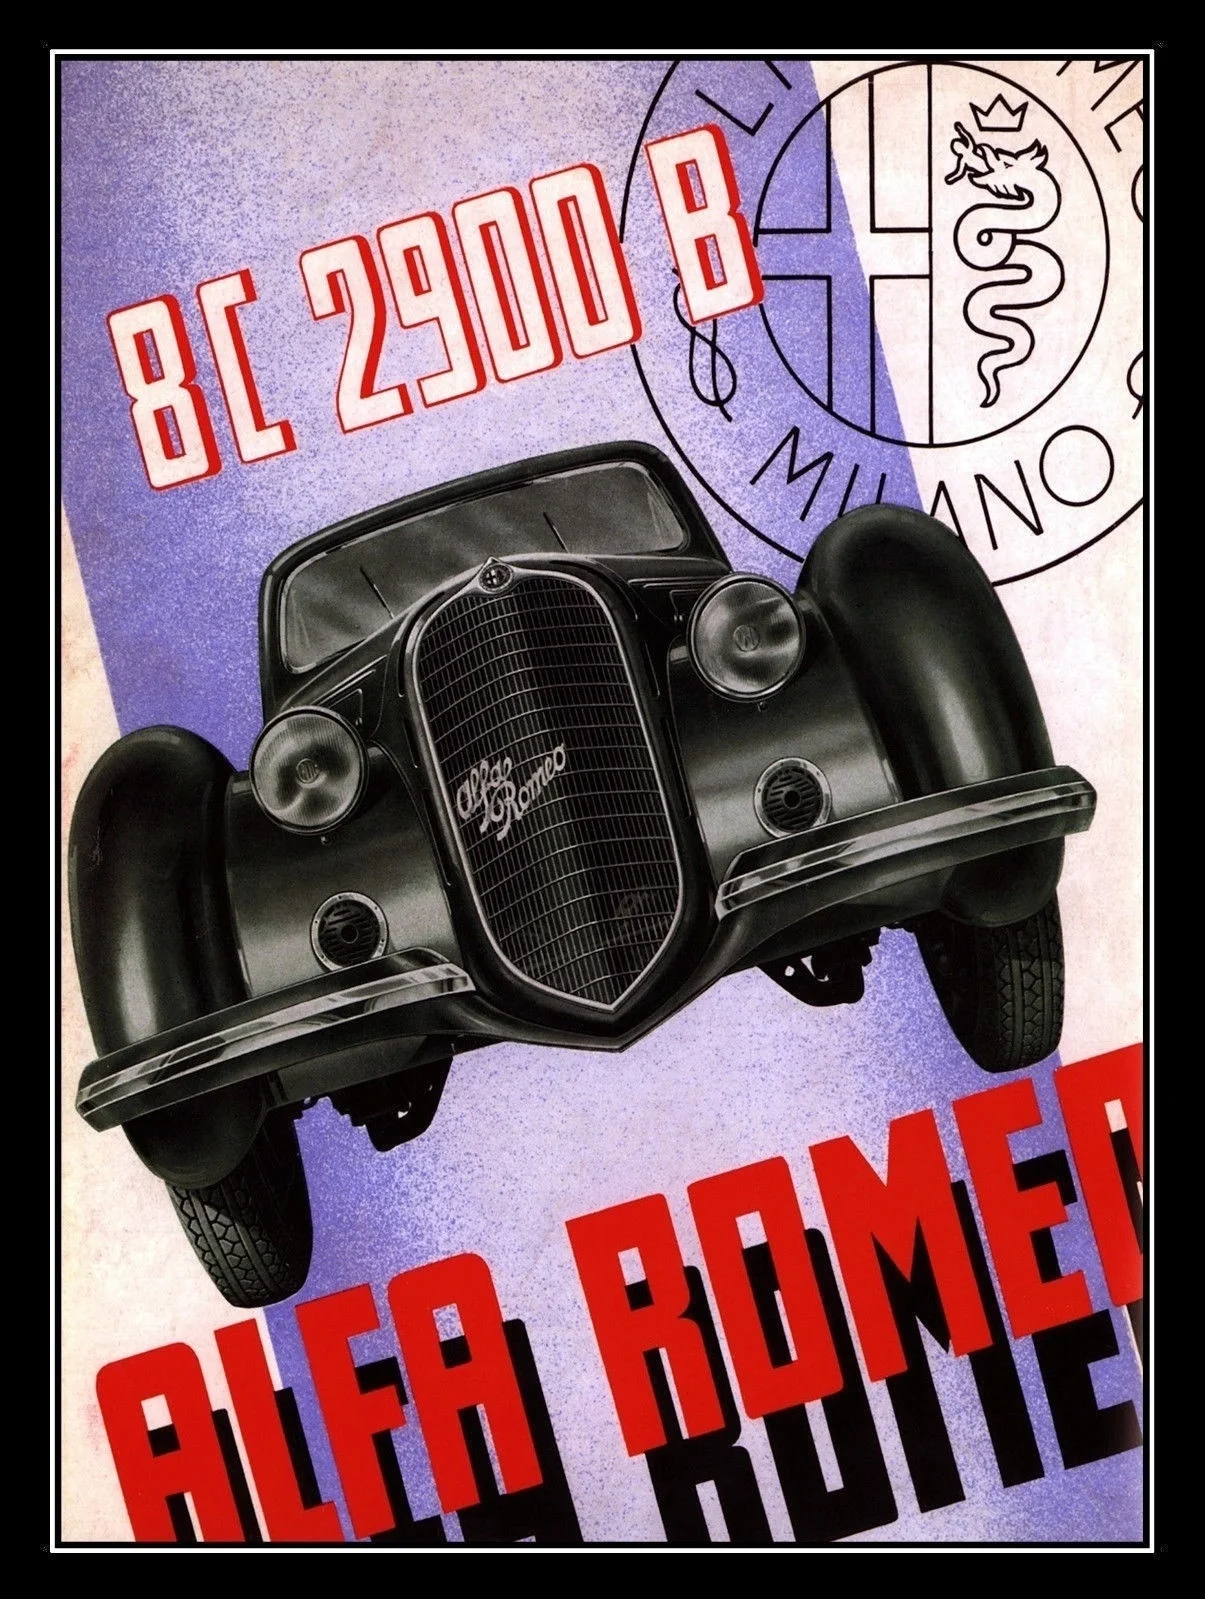 

Alfa Romeo 8c 2900 B Vintage Retro Metal Tin Sign Poster Wall Plaque(Visit Our Store, More Products!!!)